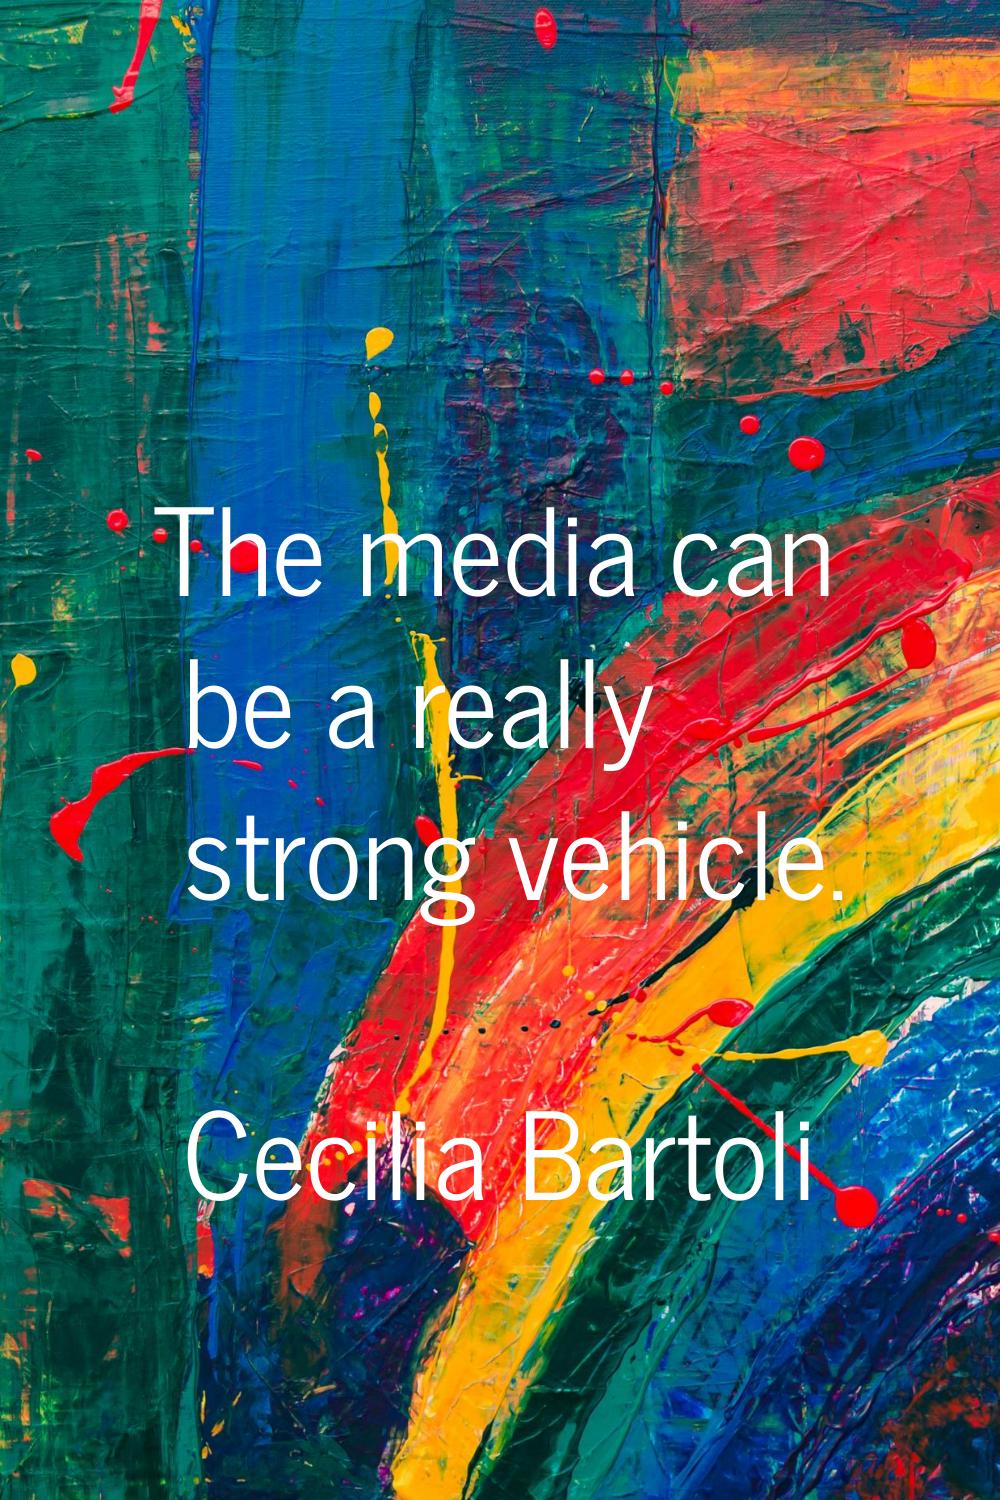 The media can be a really strong vehicle.